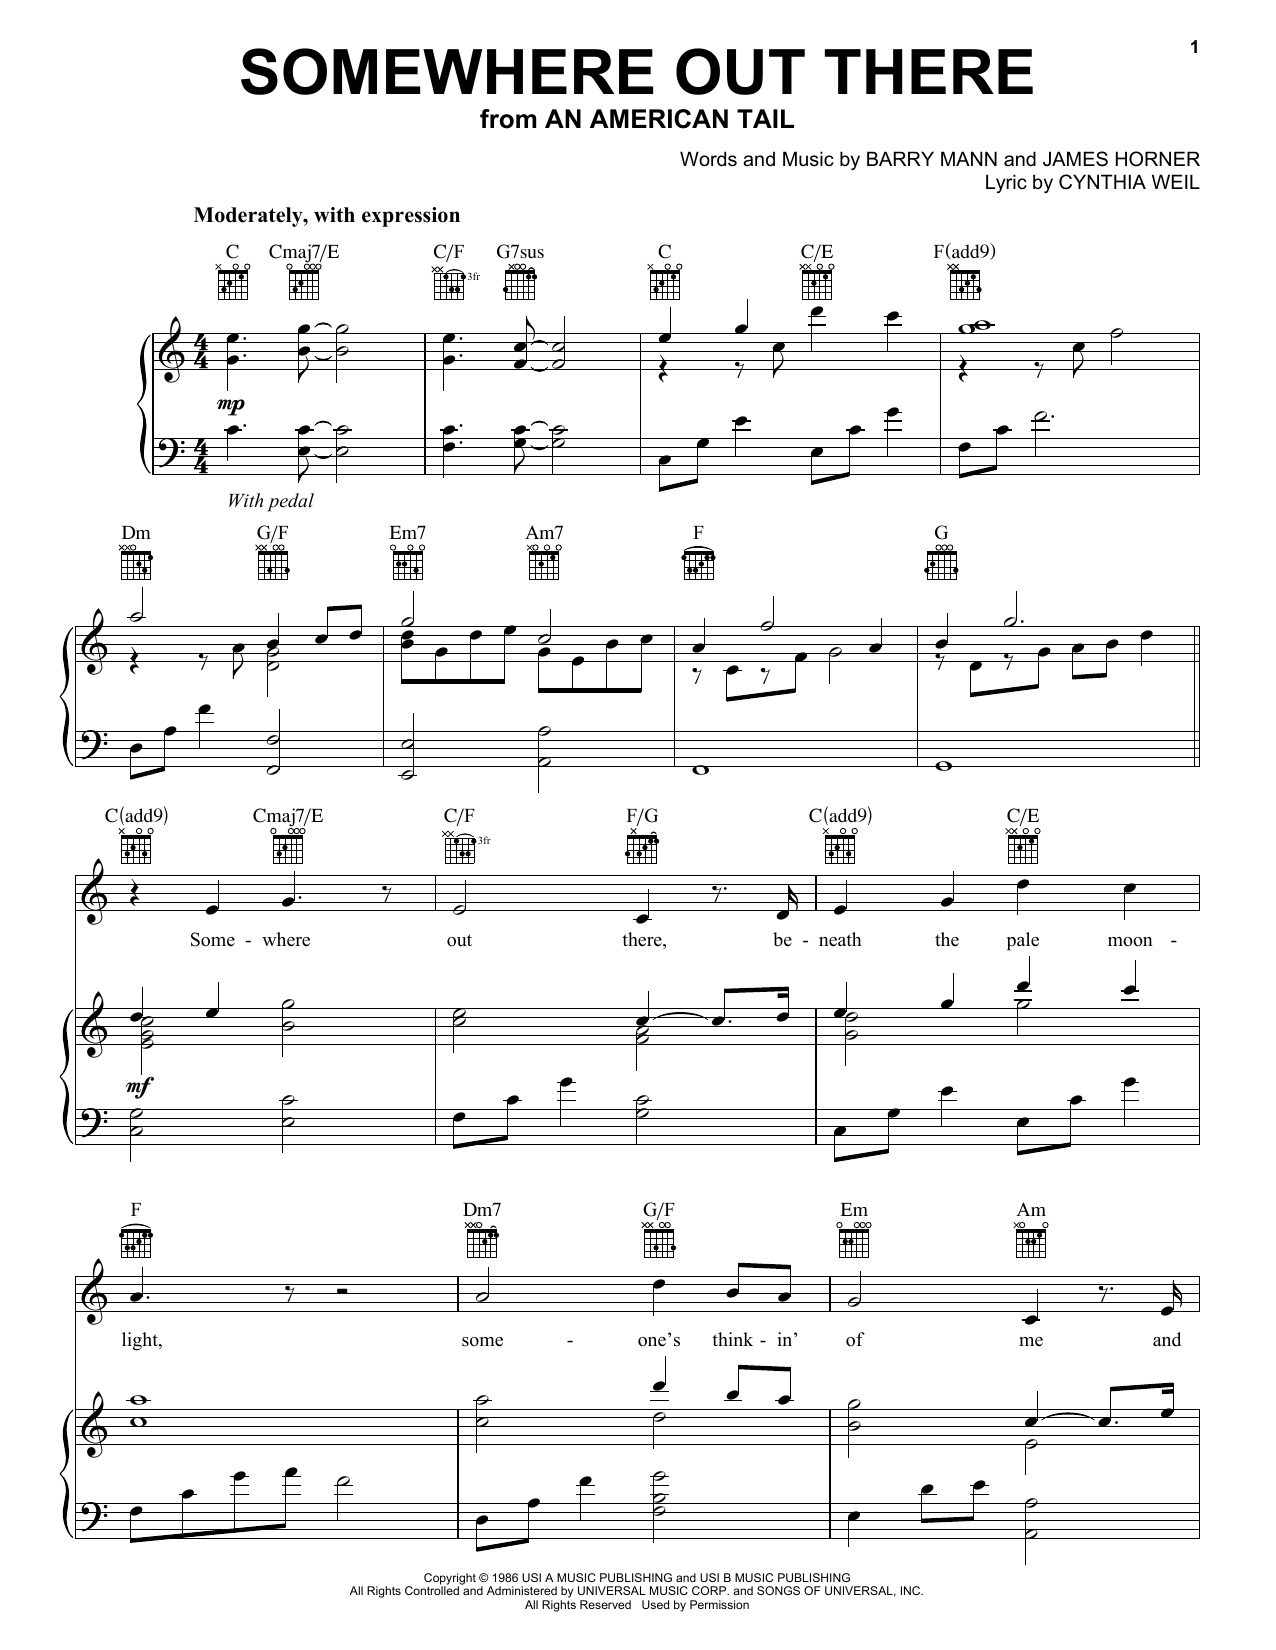 Download Linda Ronstadt & James Ingram Somewhere Out There Sheet Music